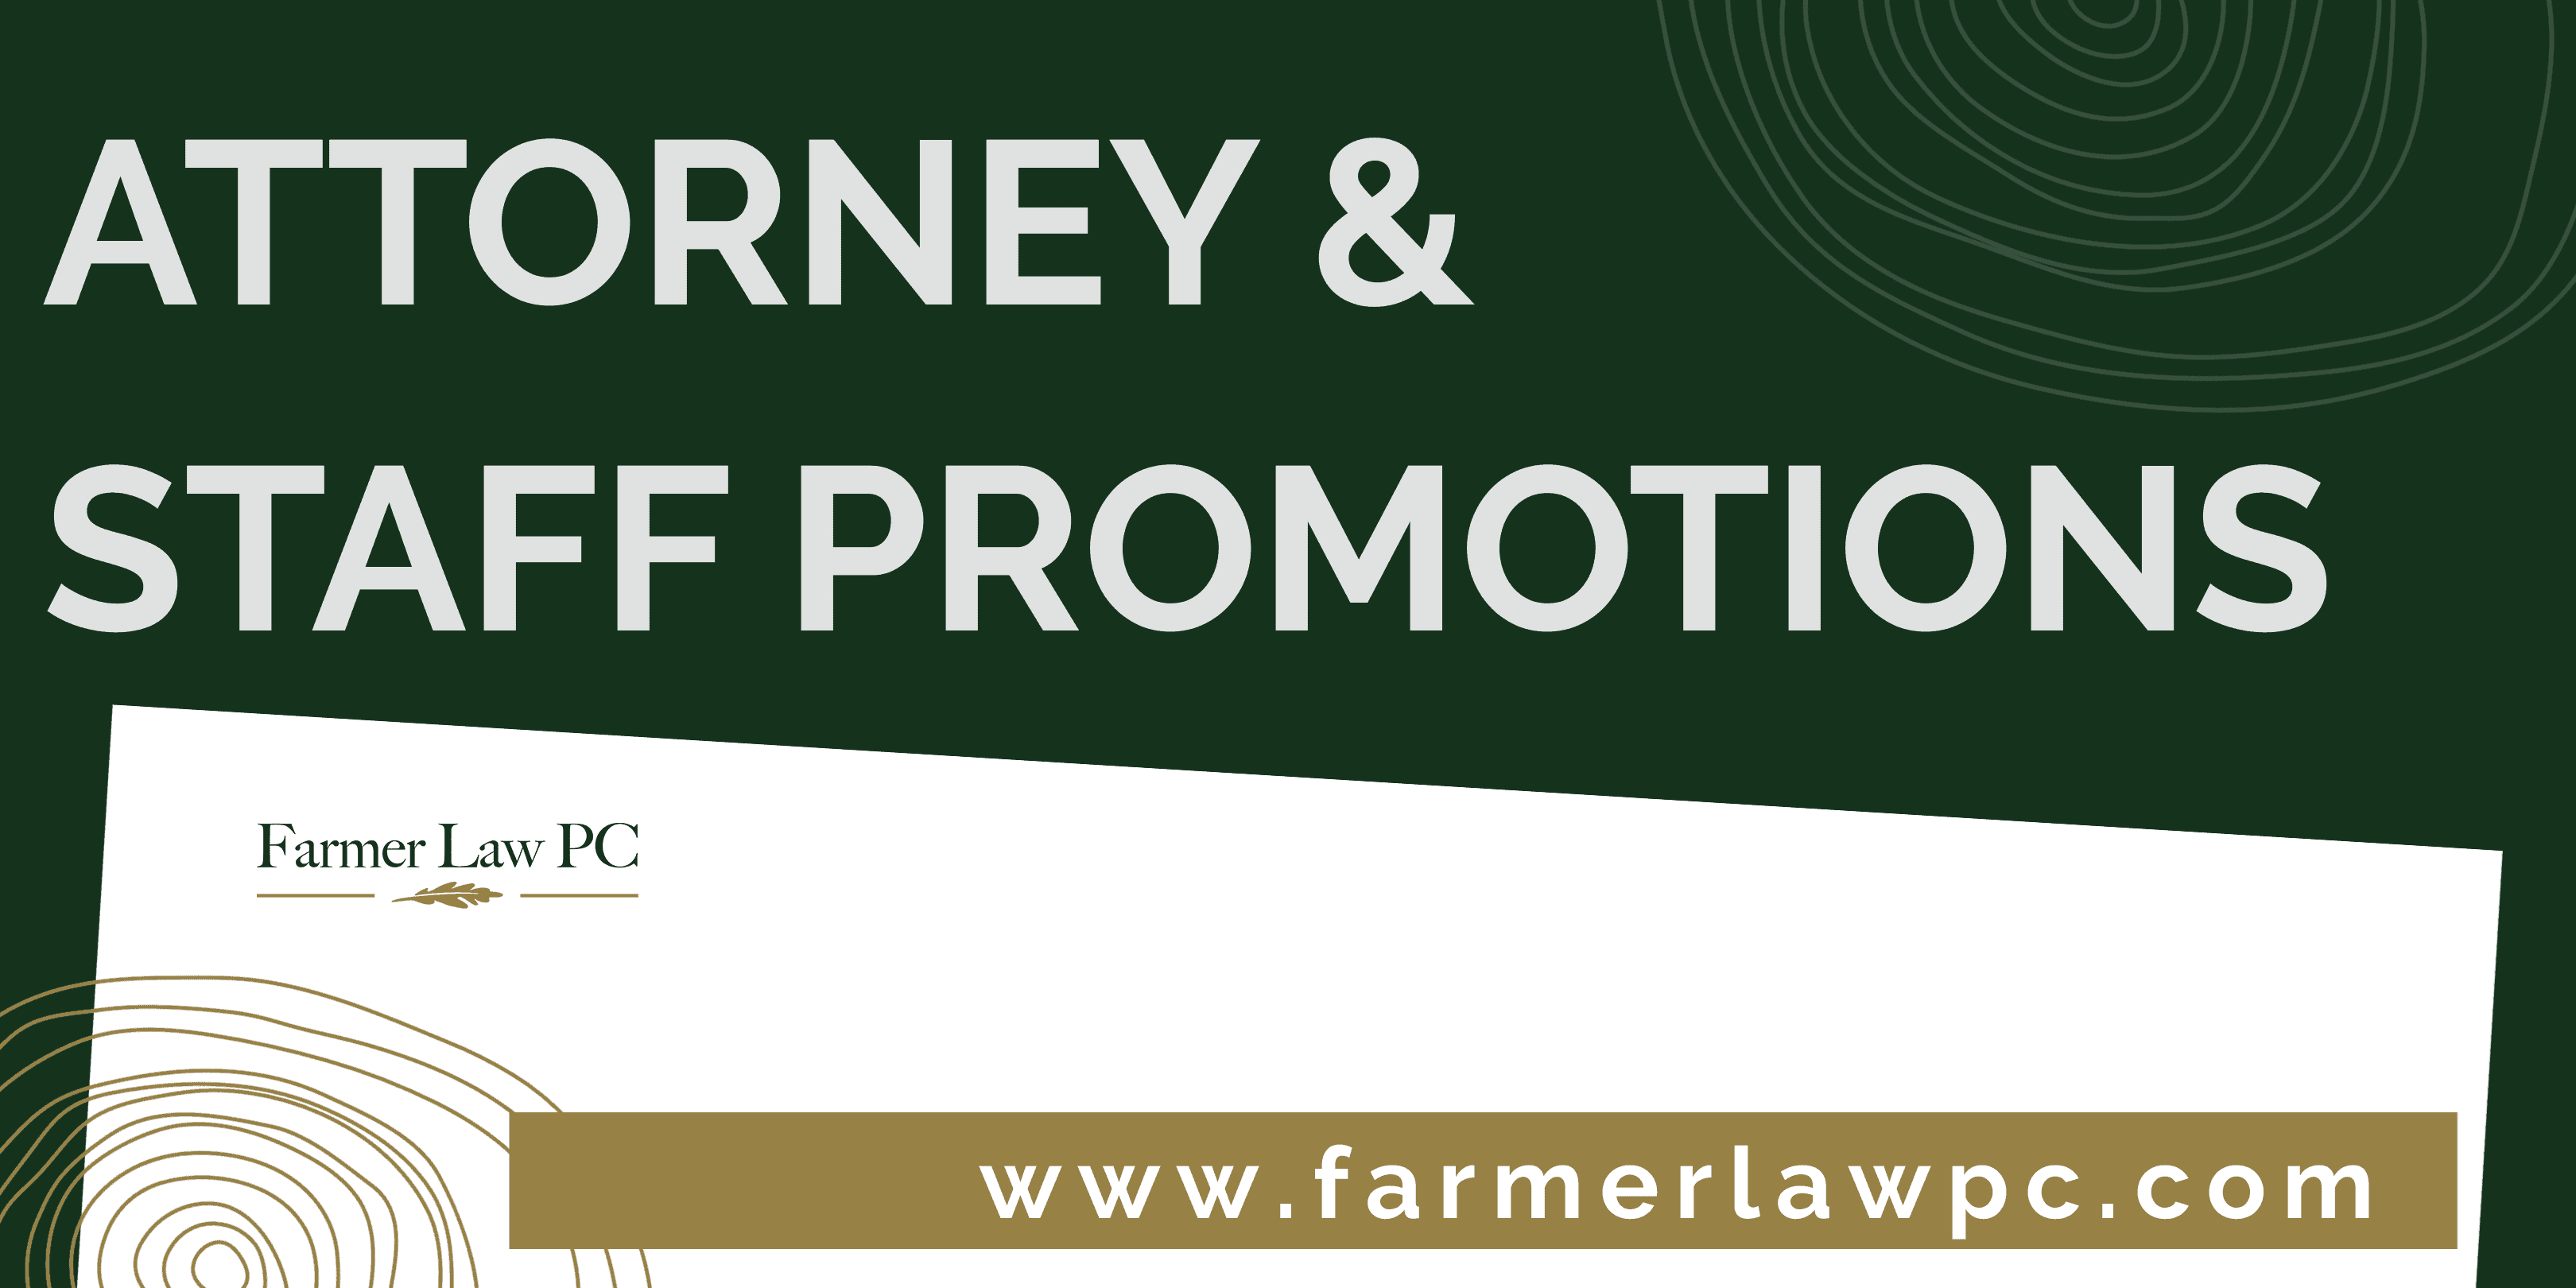 Farmer Law PC Announces Attorney and Staff Promotions – Q3 2021